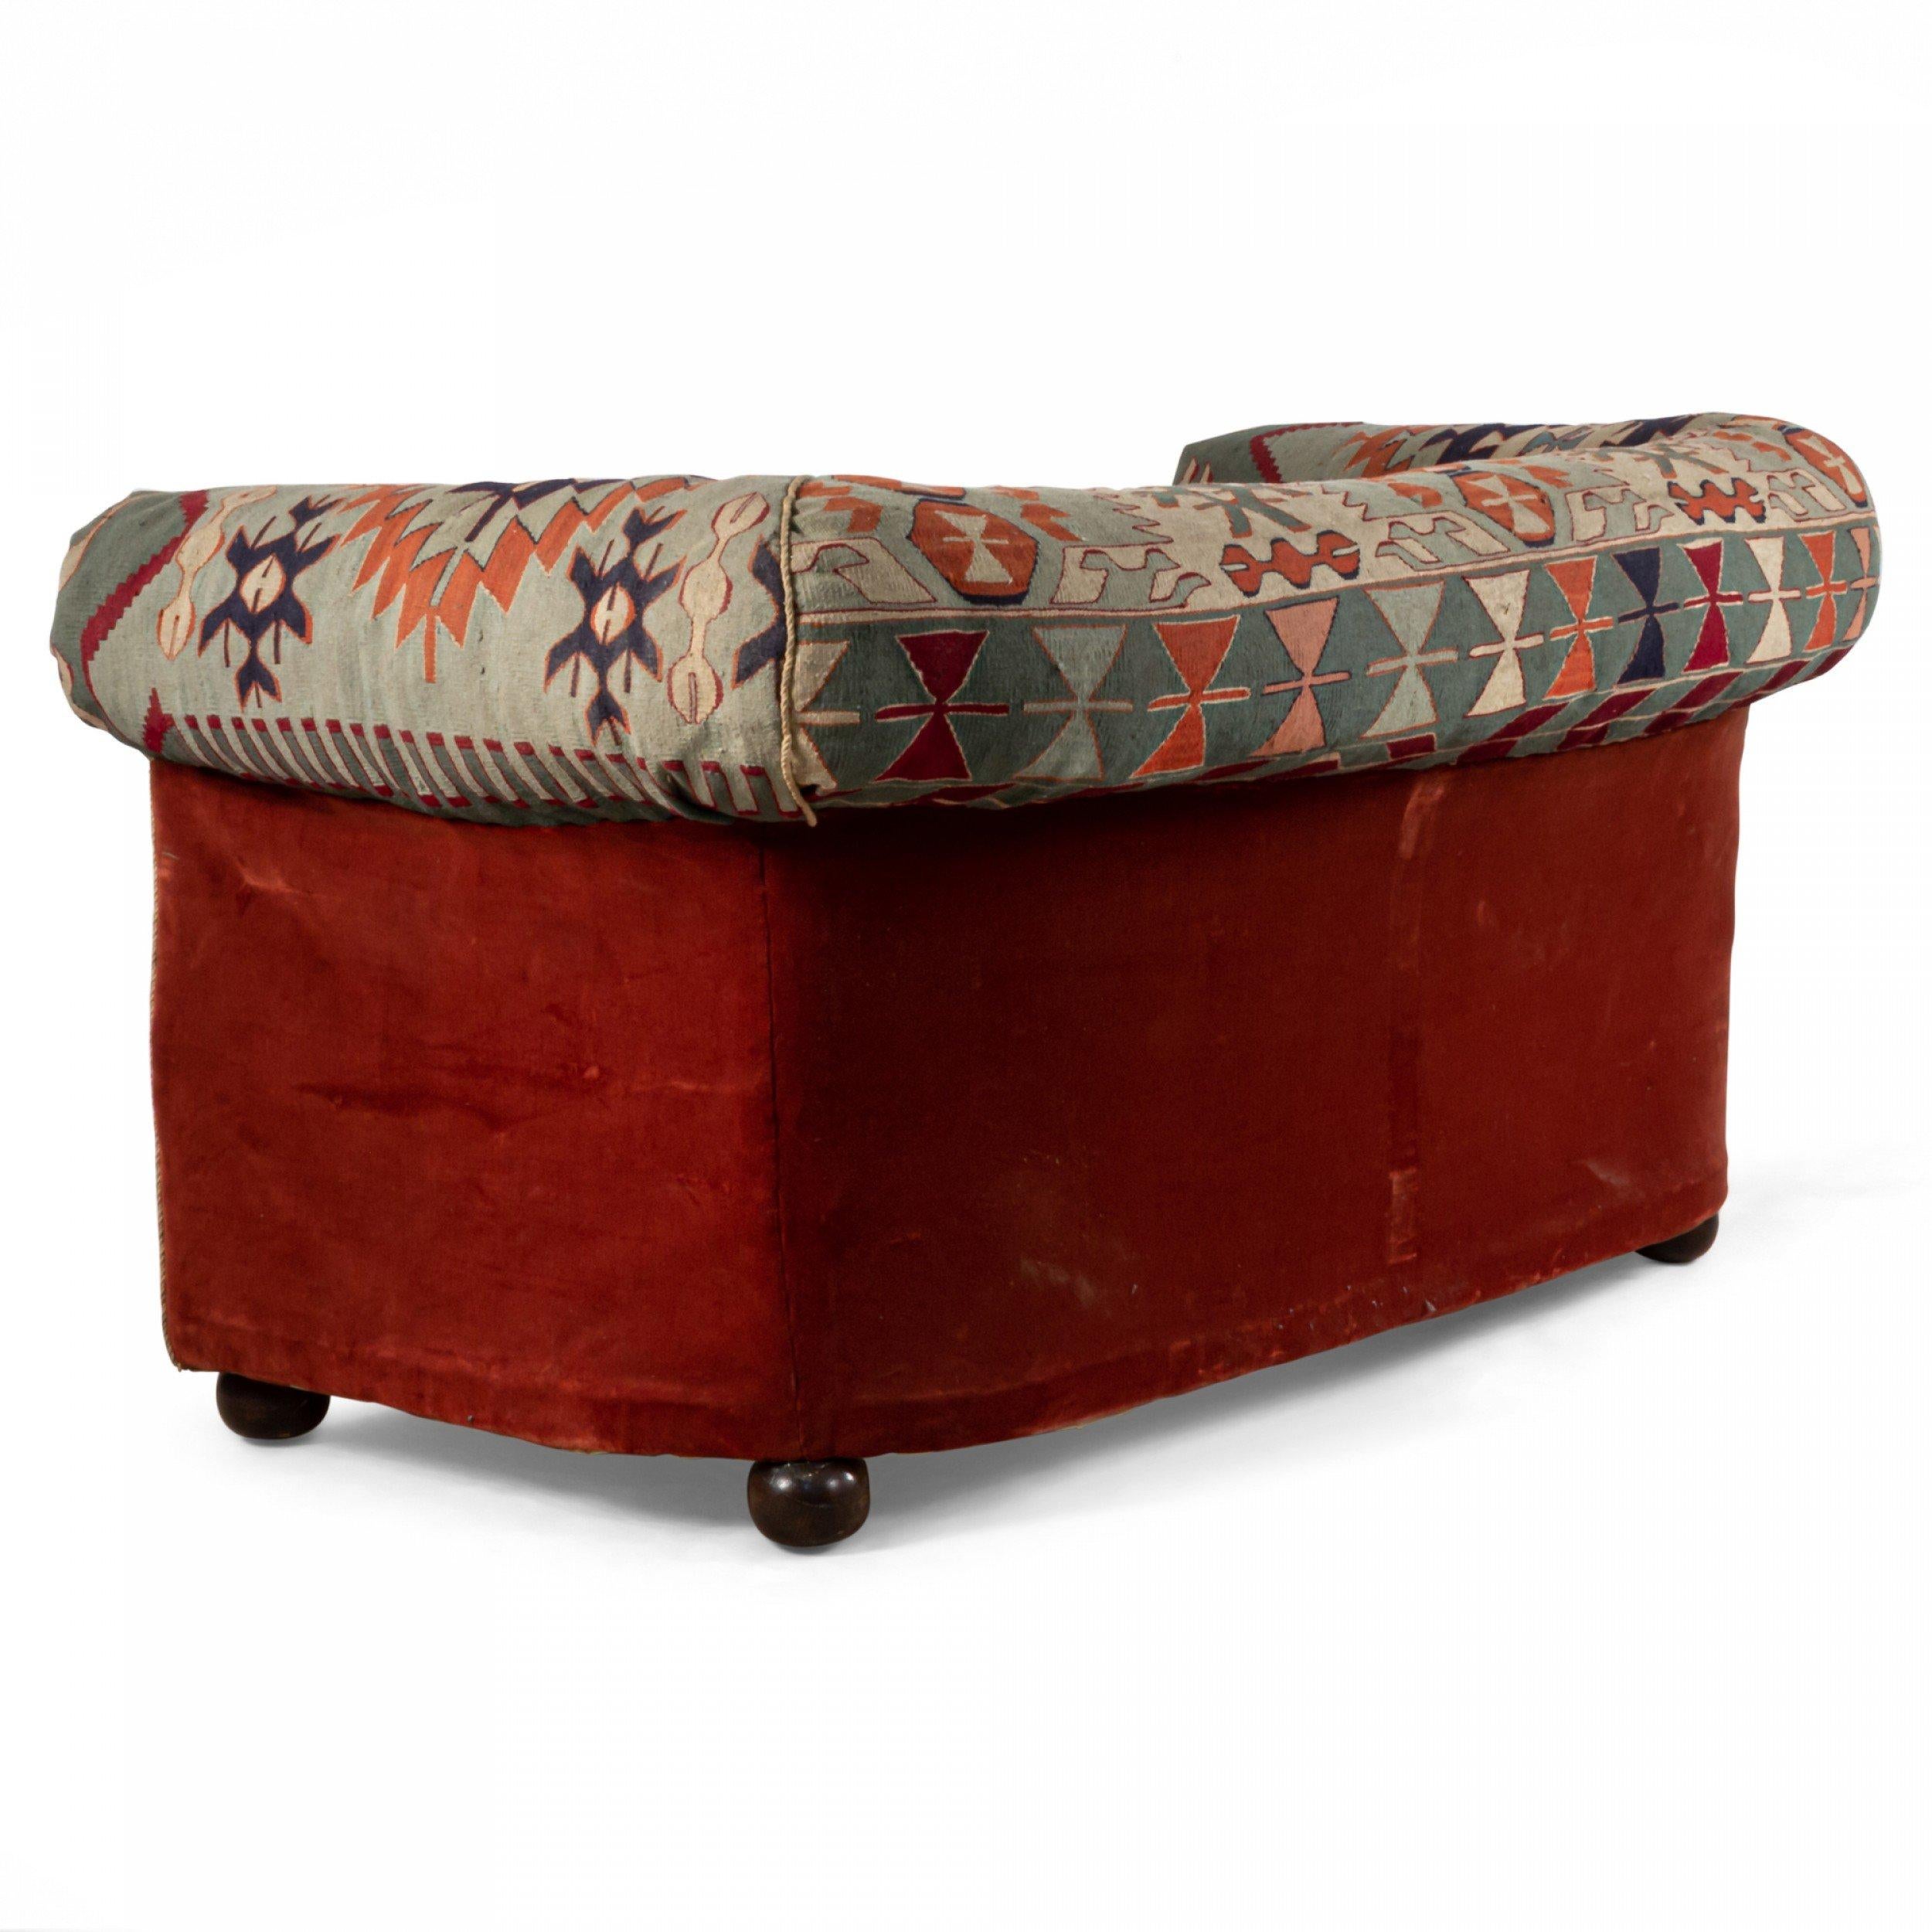 English Victorian Turkish Kilim Loveseats In Good Condition For Sale In New York, NY